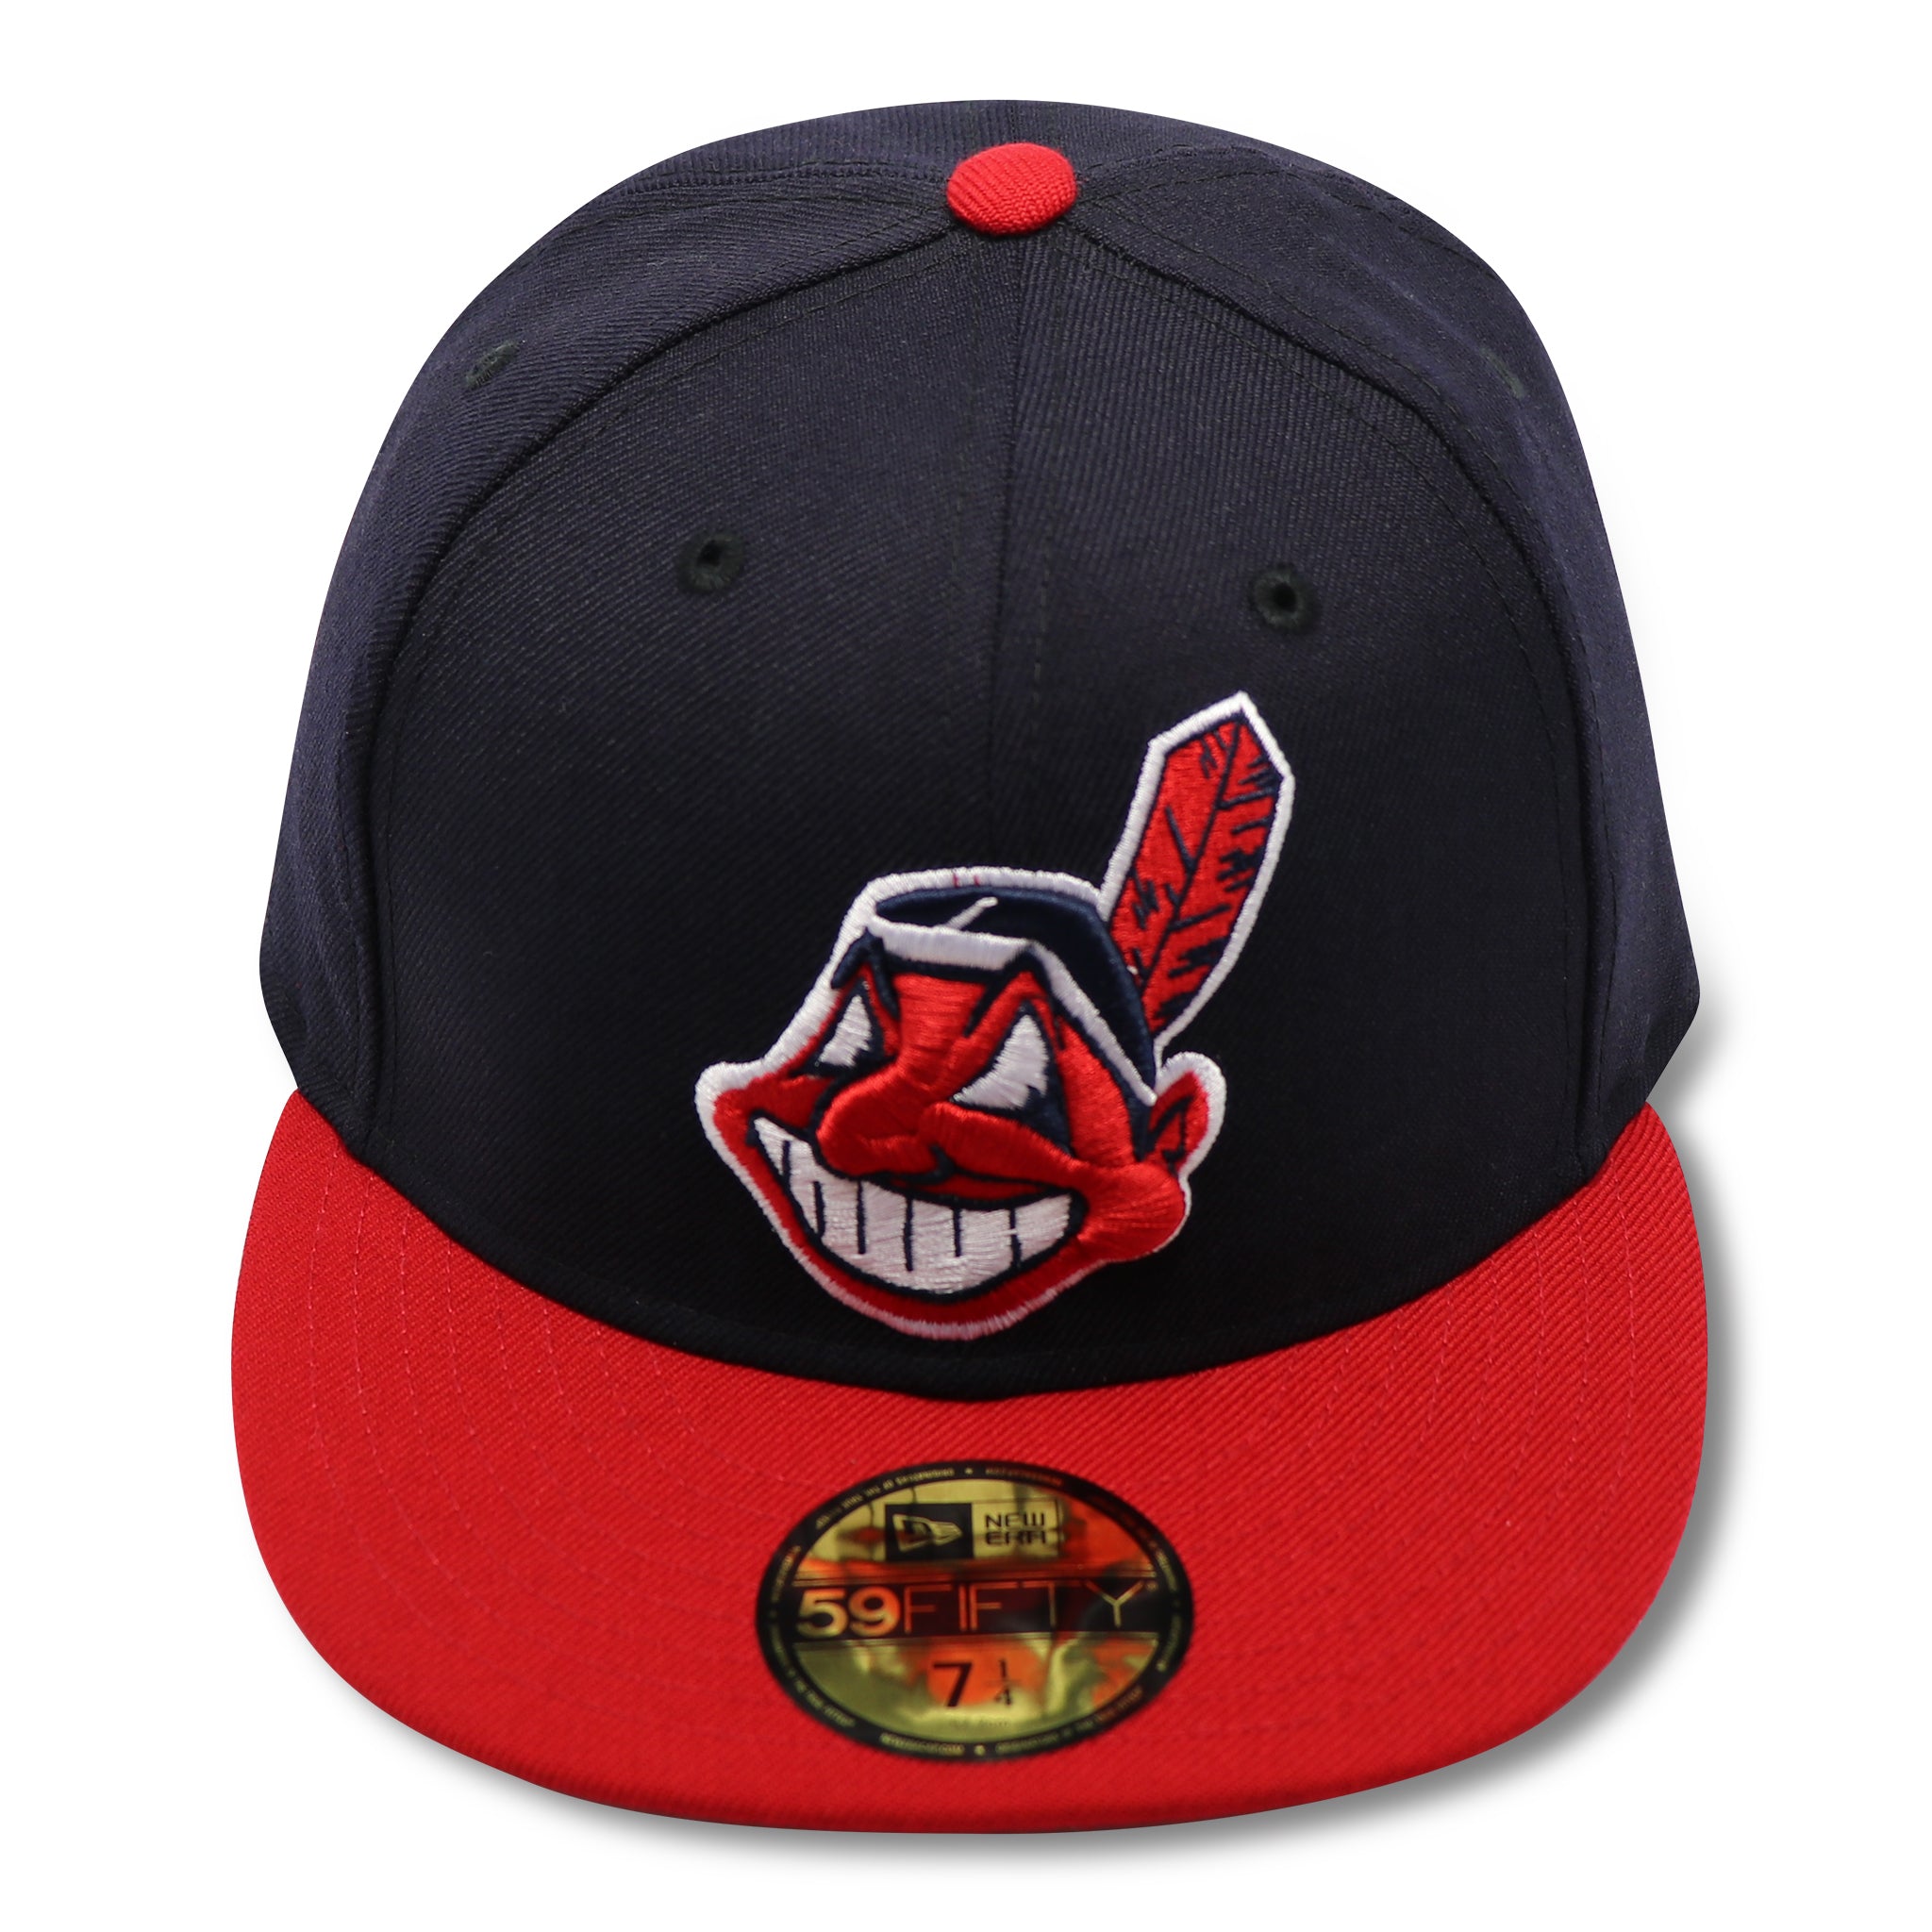 CLEVELAND INDIANS NEW ERA (2-TONE) (1999-2002) Home FITTED